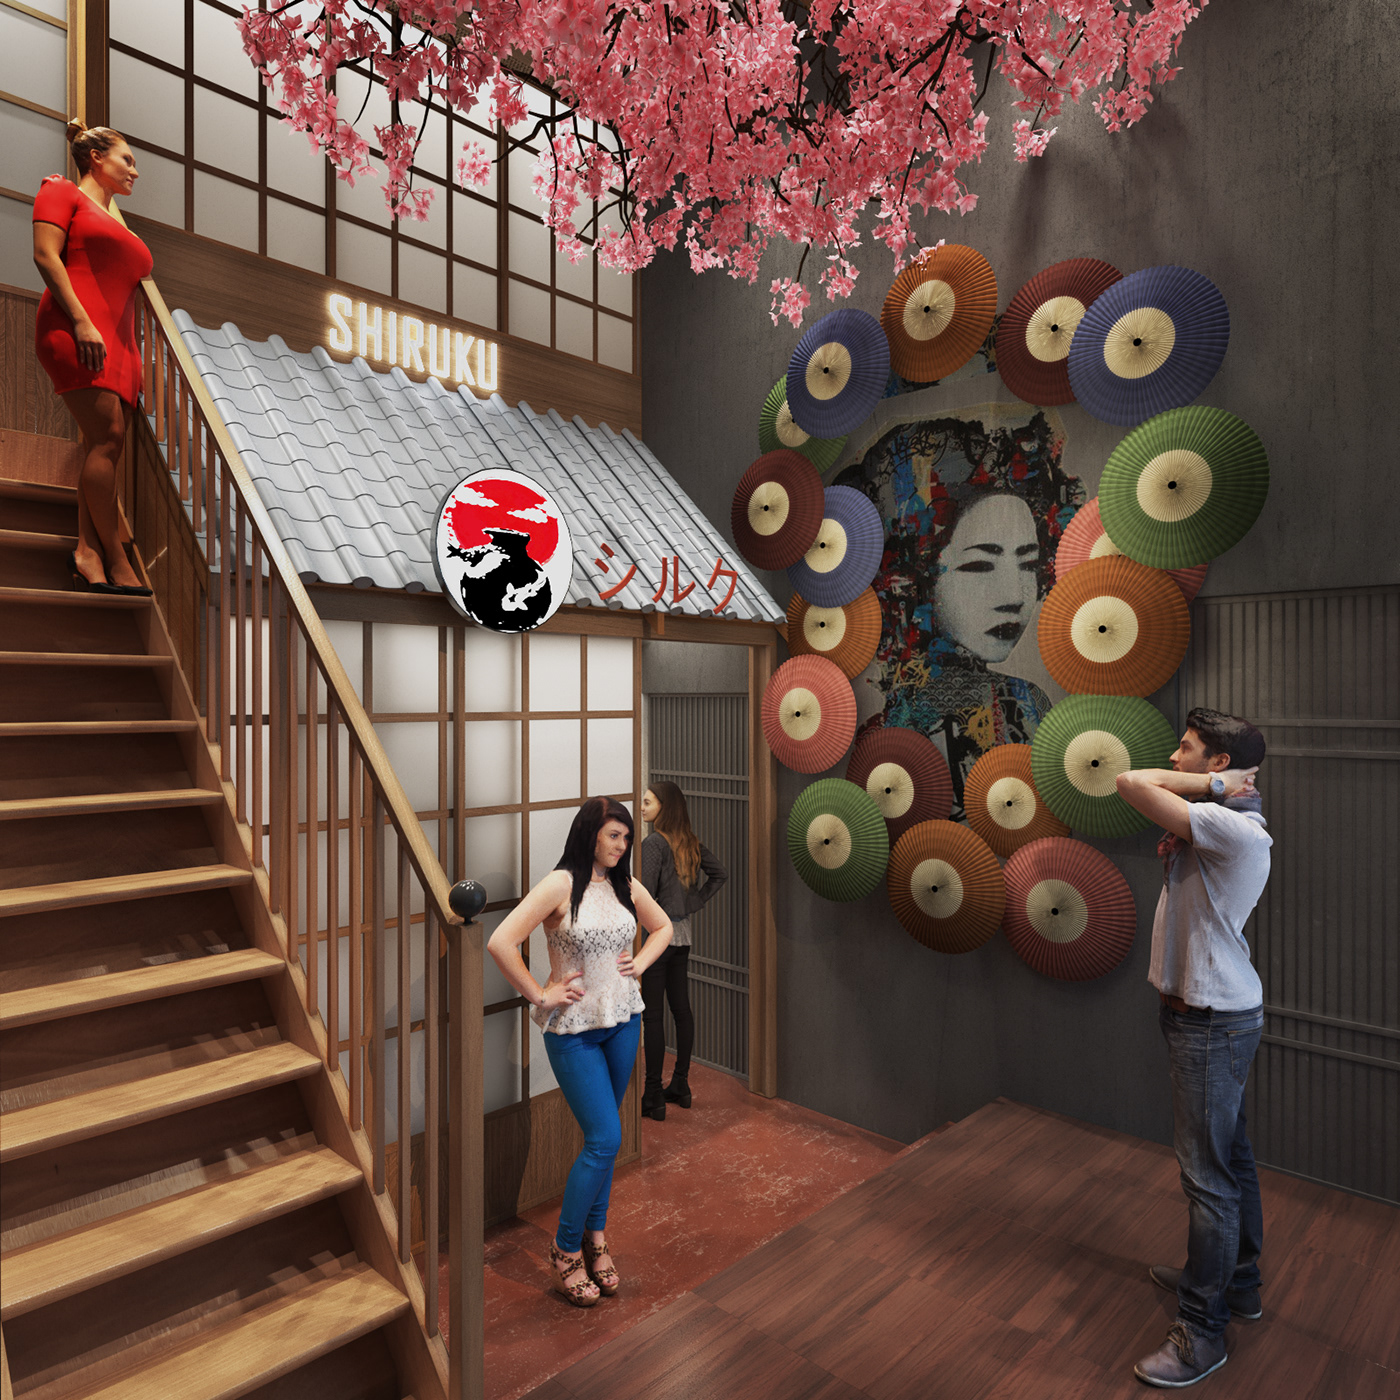 3ds max architecture decor japan New York origami  restaurant wood